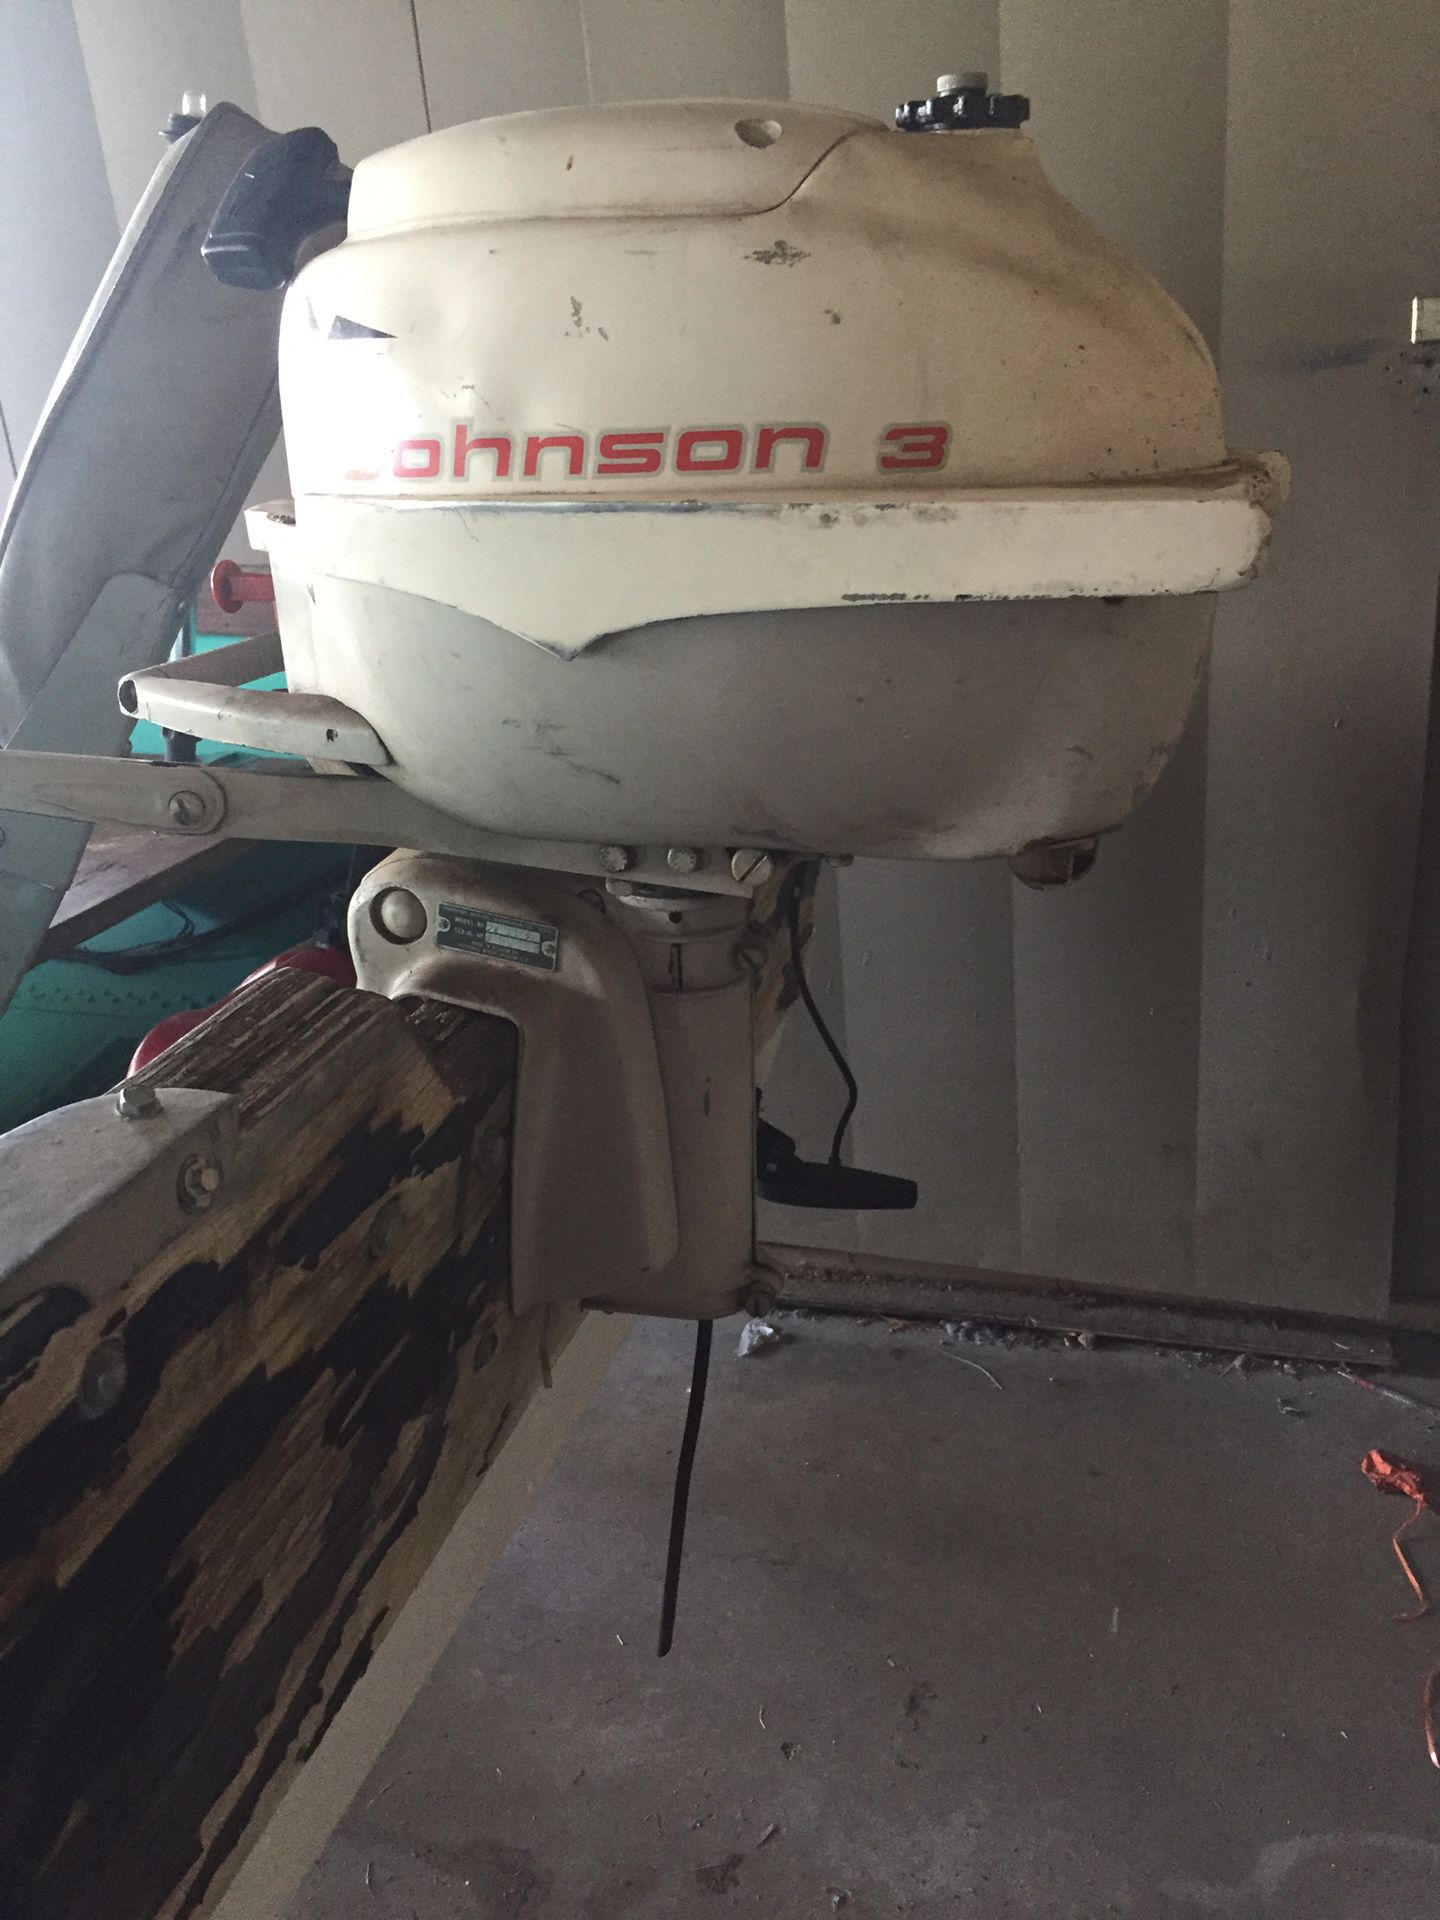 1960s Johnson 3hp outboard